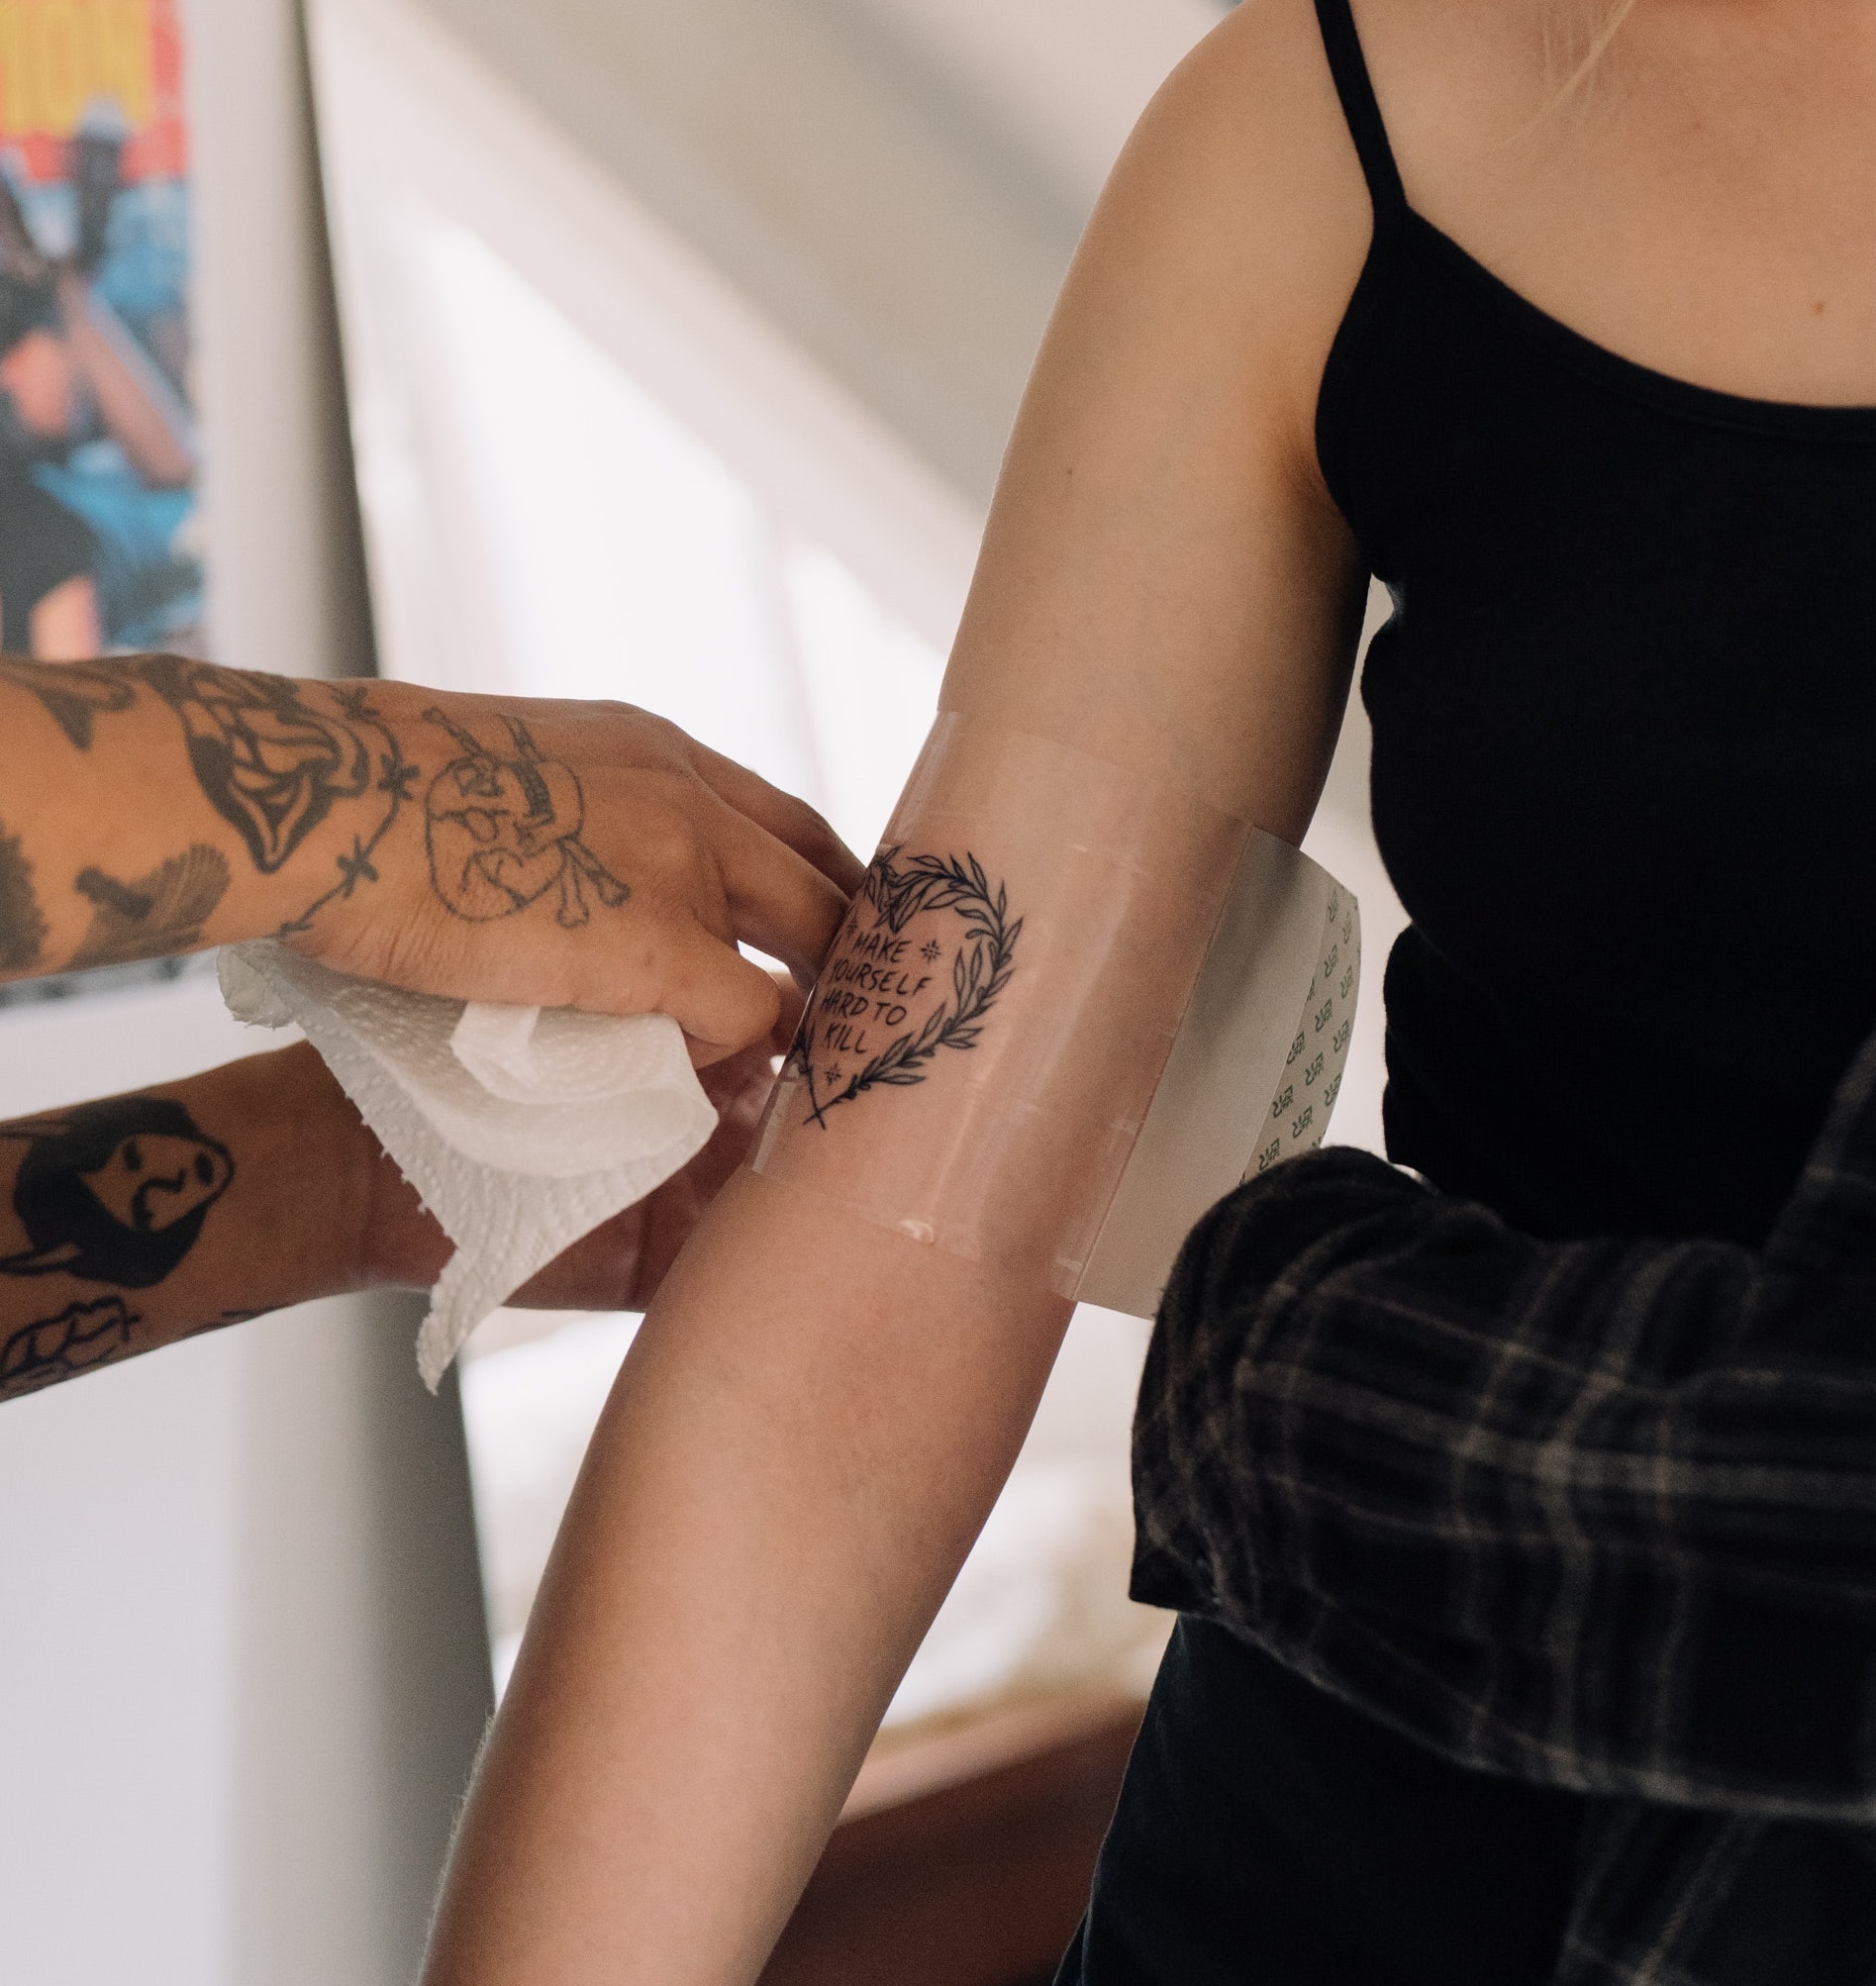 9 Items You Need For Your Stick and Poke Setup